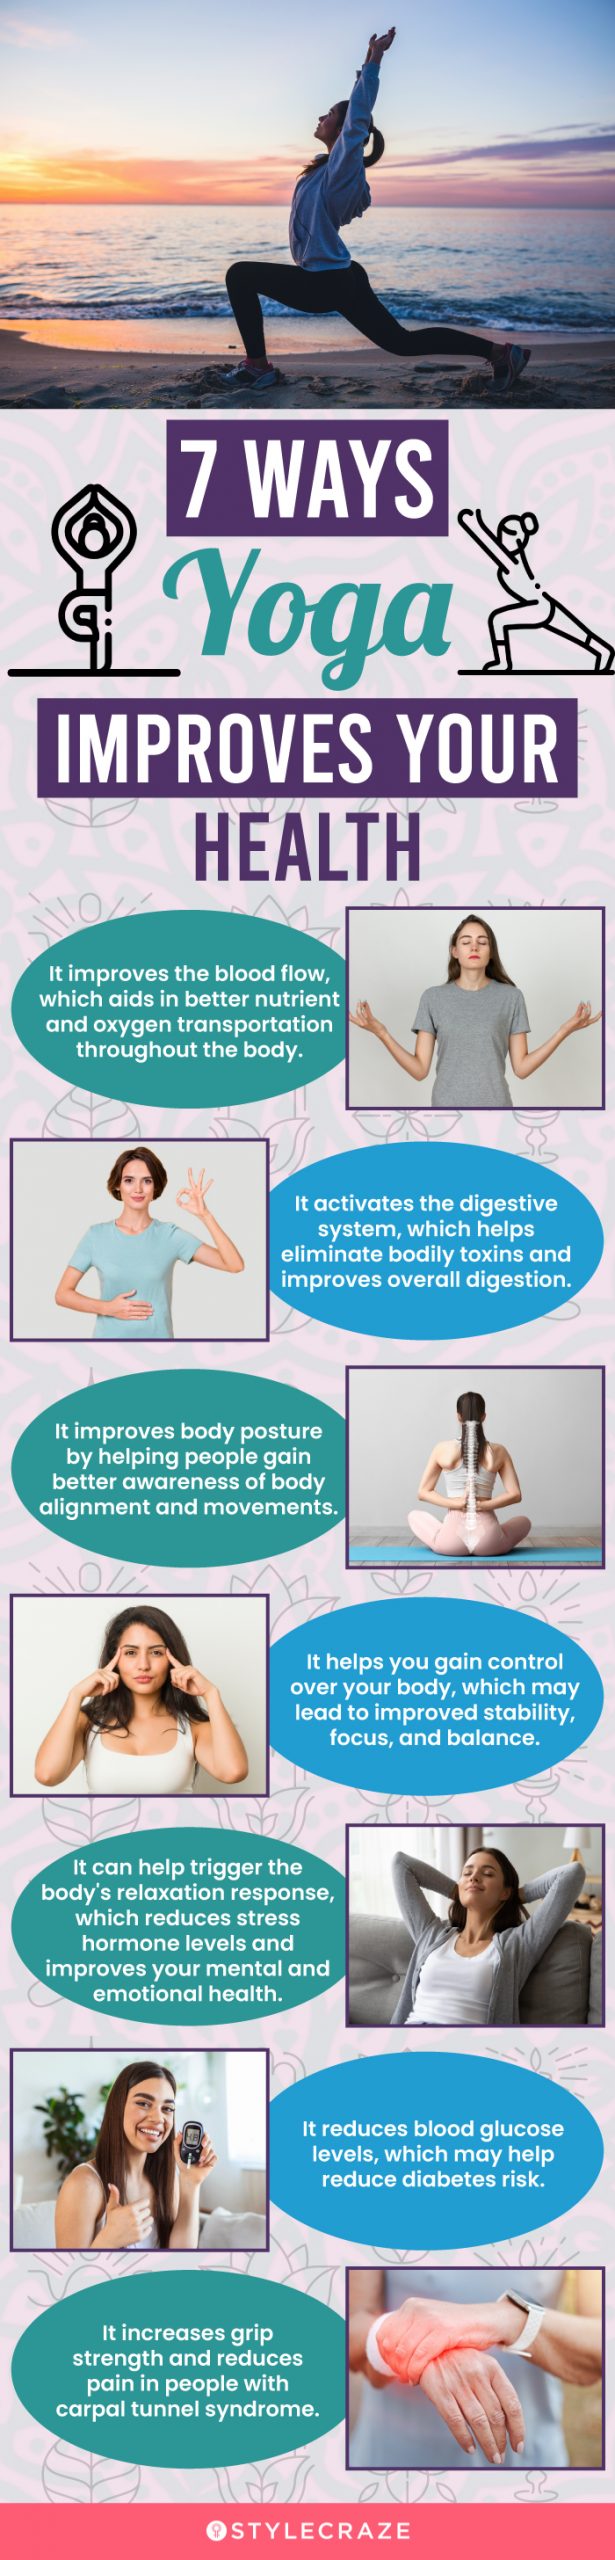 7 way yoga improves your health (infographic)